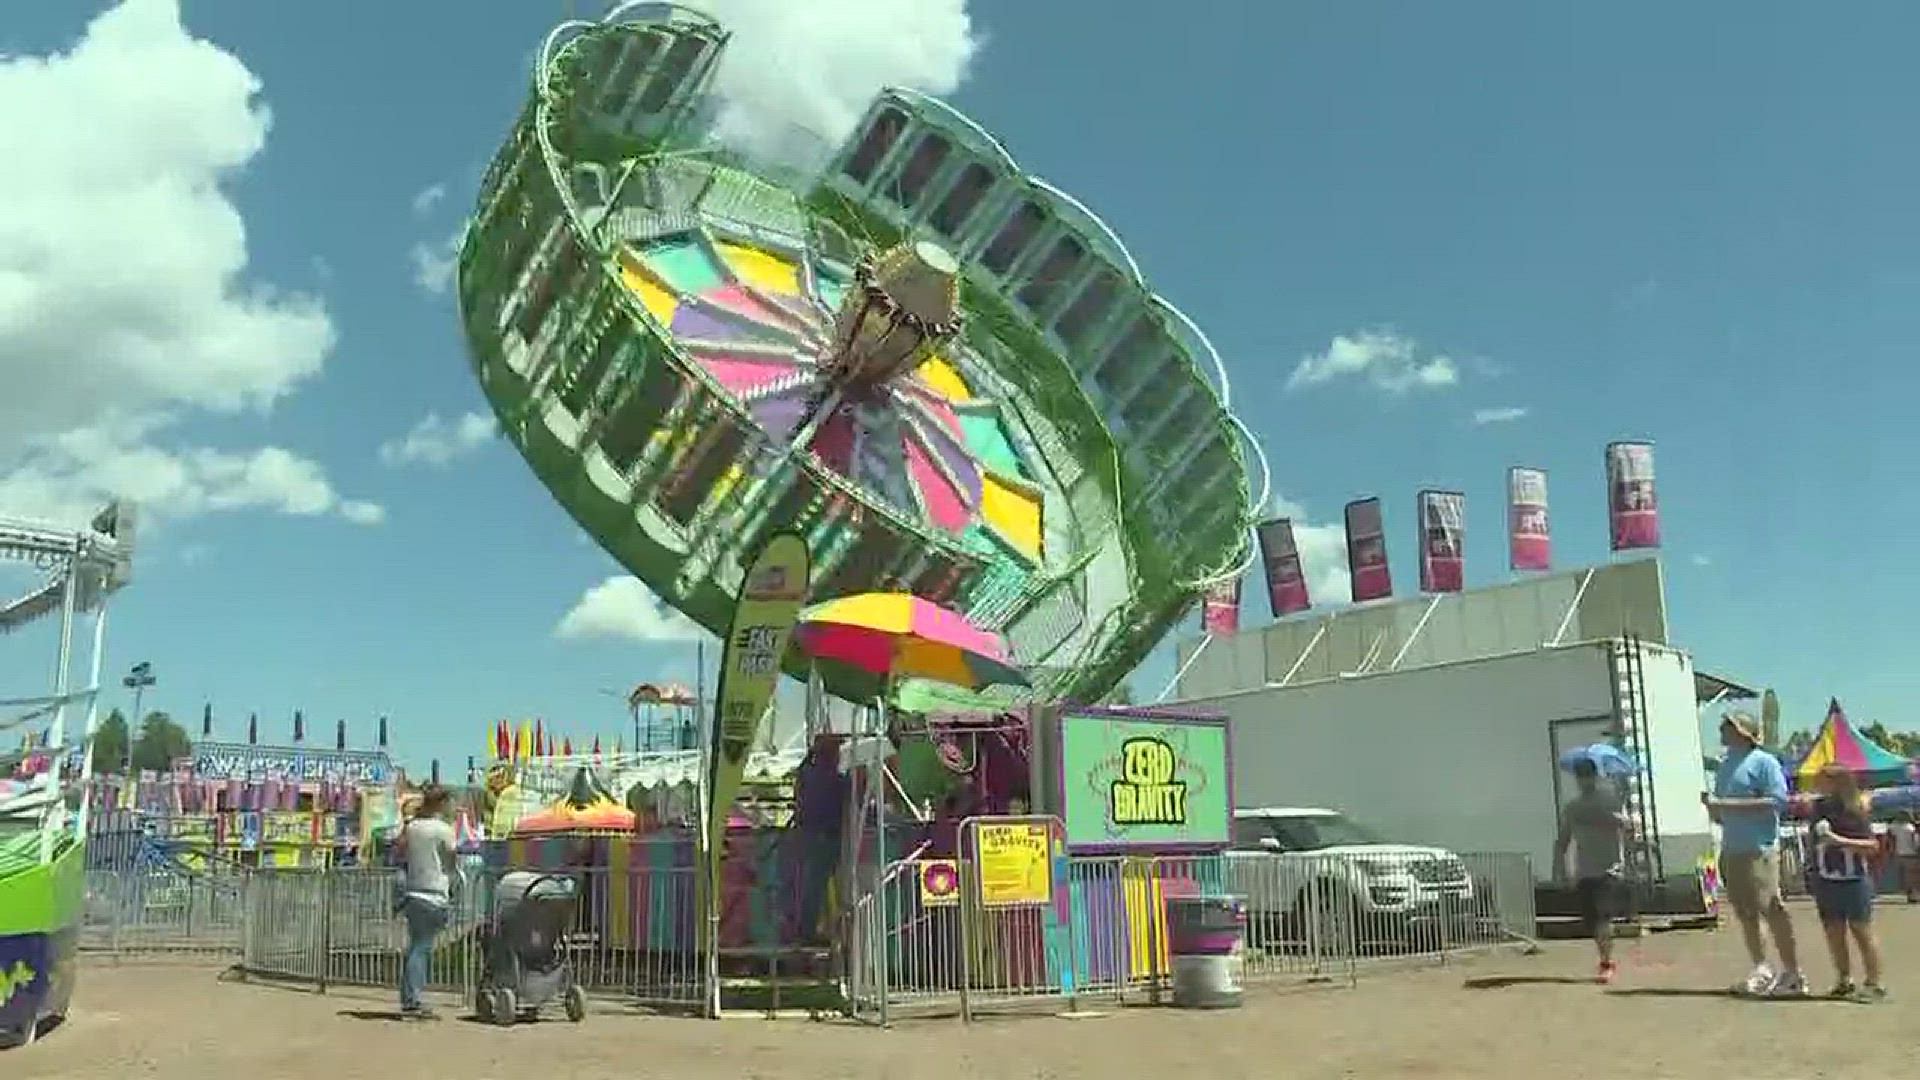 Coconino County Fair returns to Flagstaff this Labor Day weekend